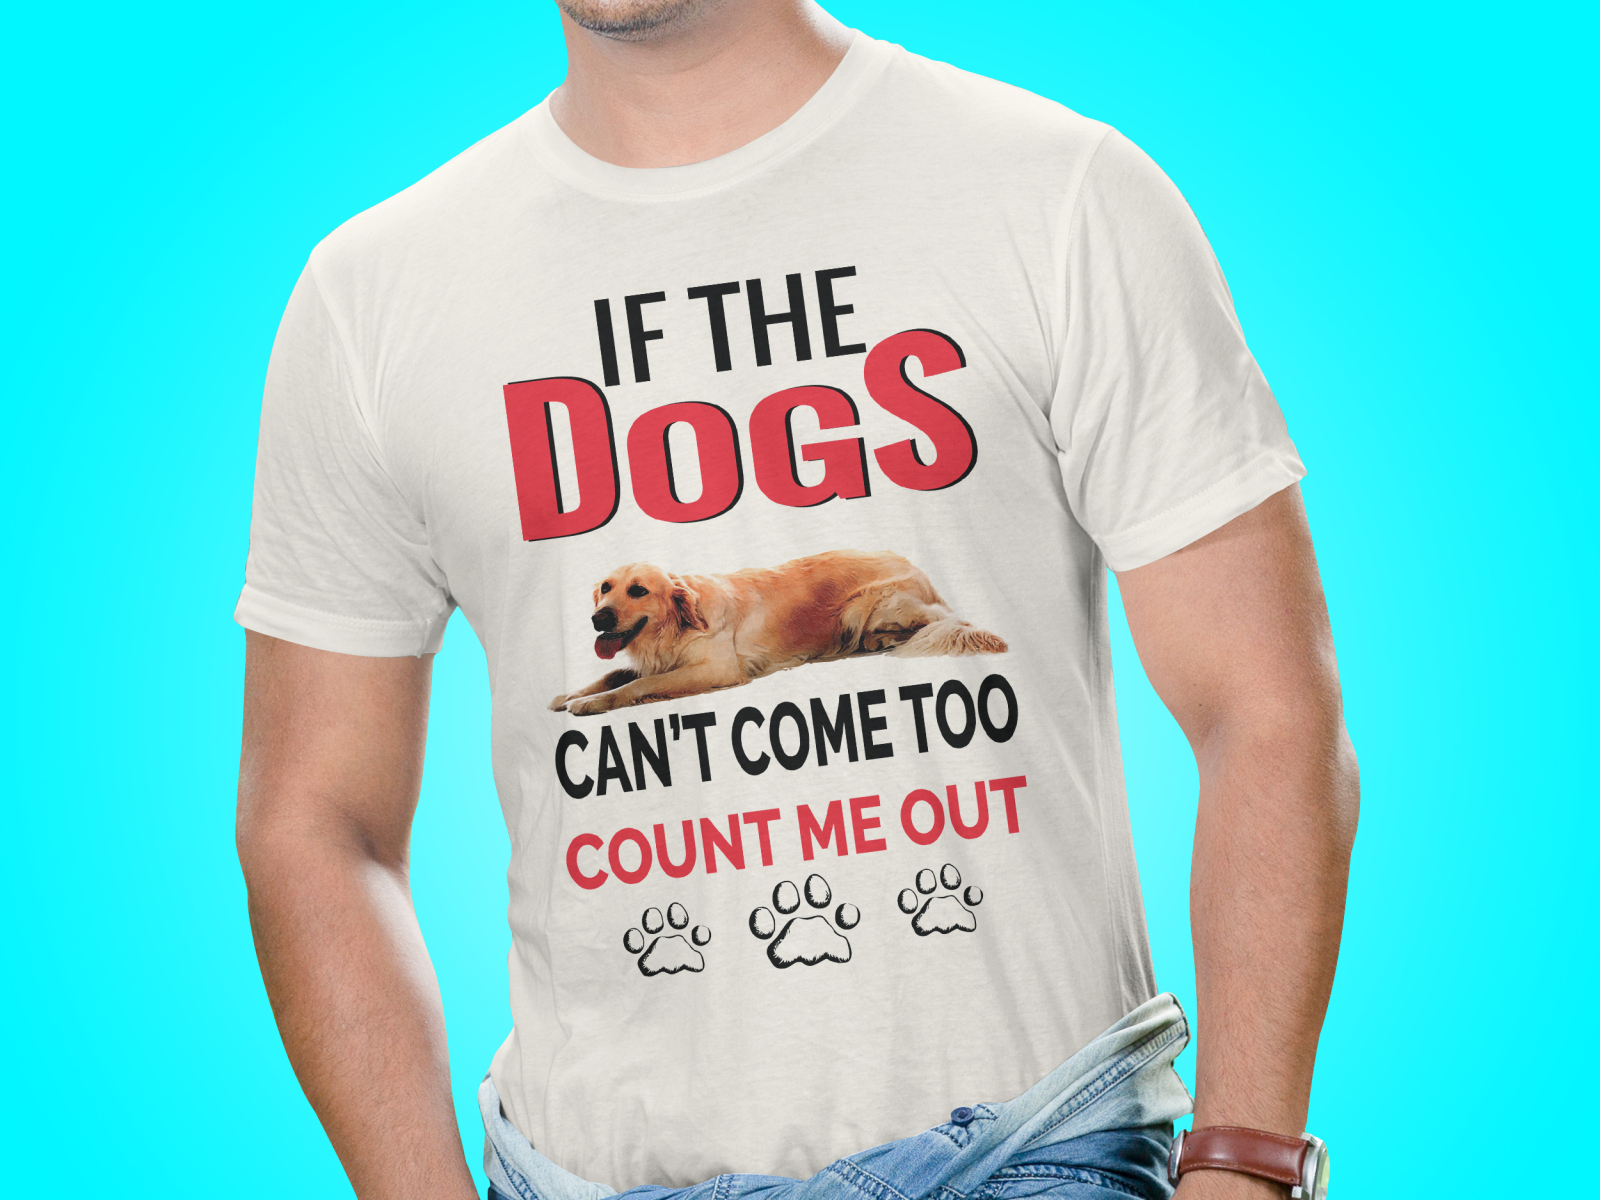 if-the-dog-t-shirt-design-by-arman02islam-on-dribbble